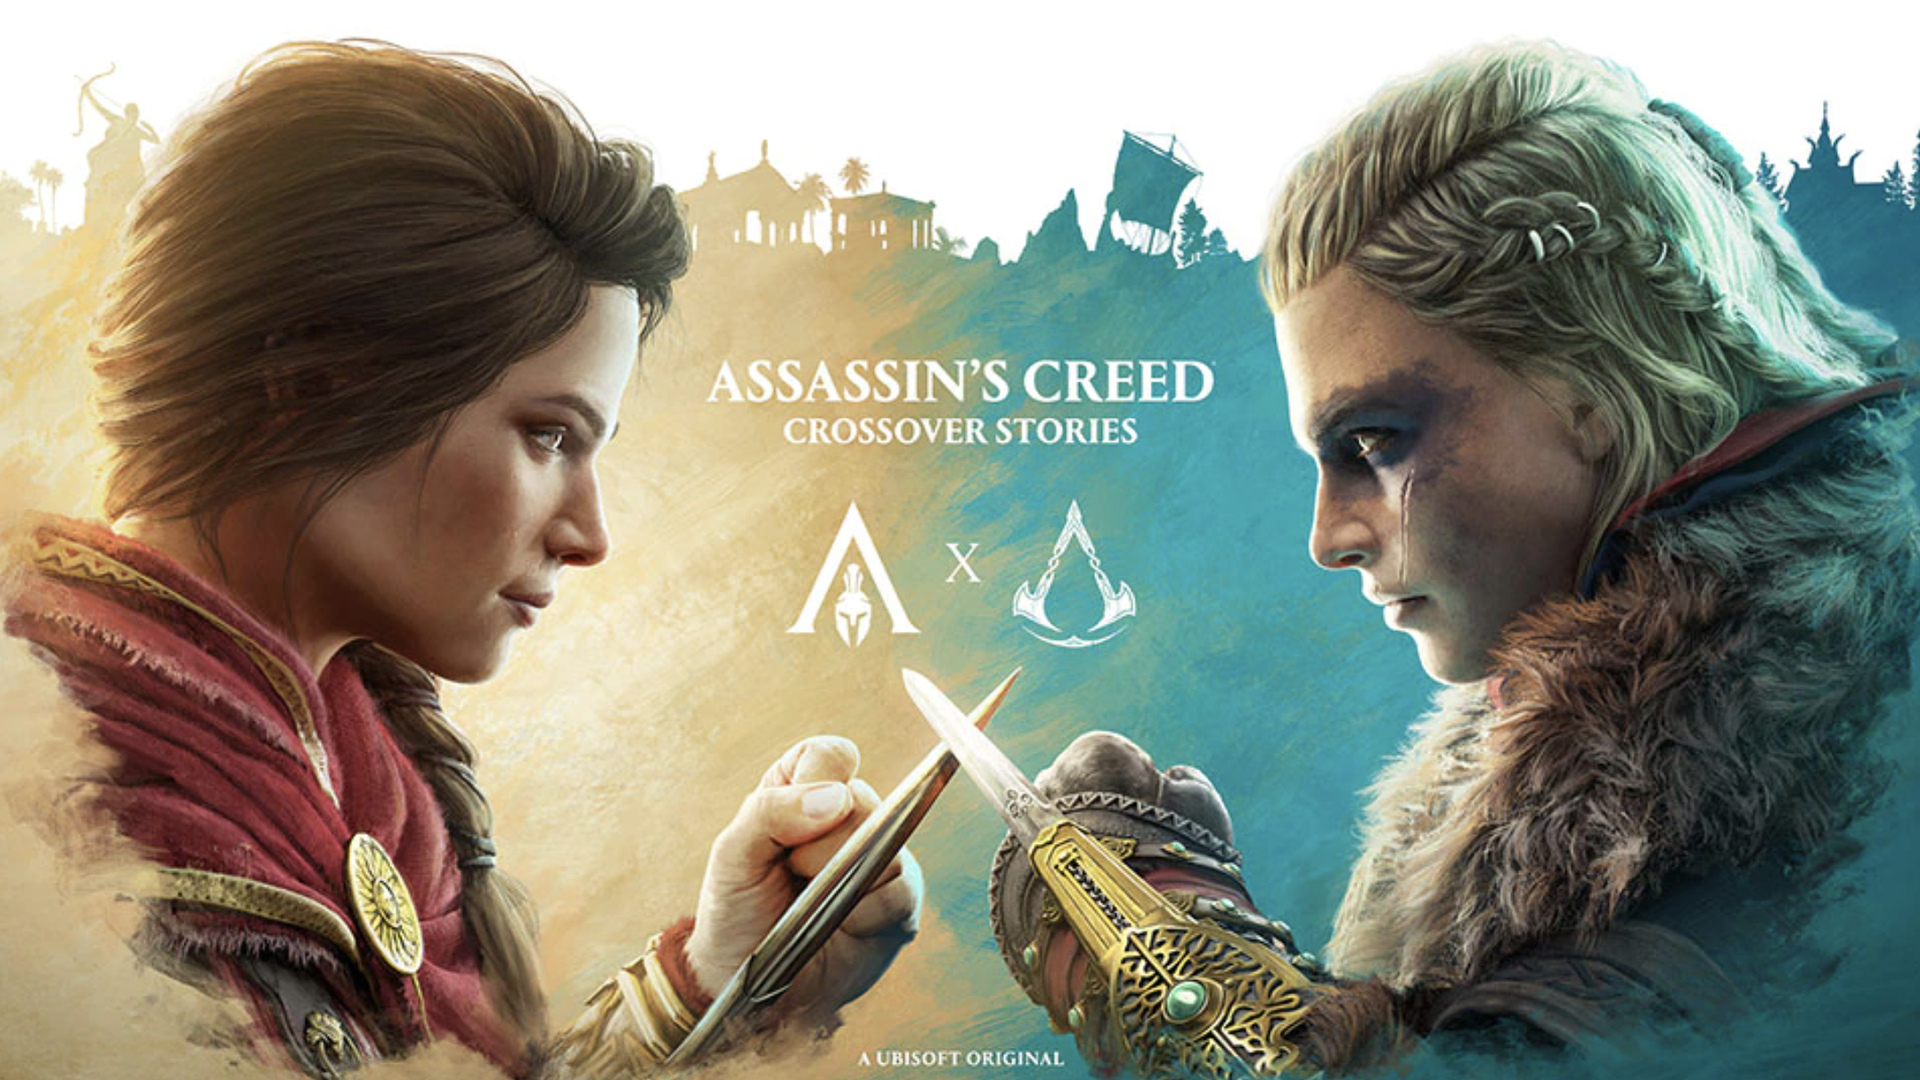 Illustration of two warrior women facing off with an Assassin's Creed logo between them